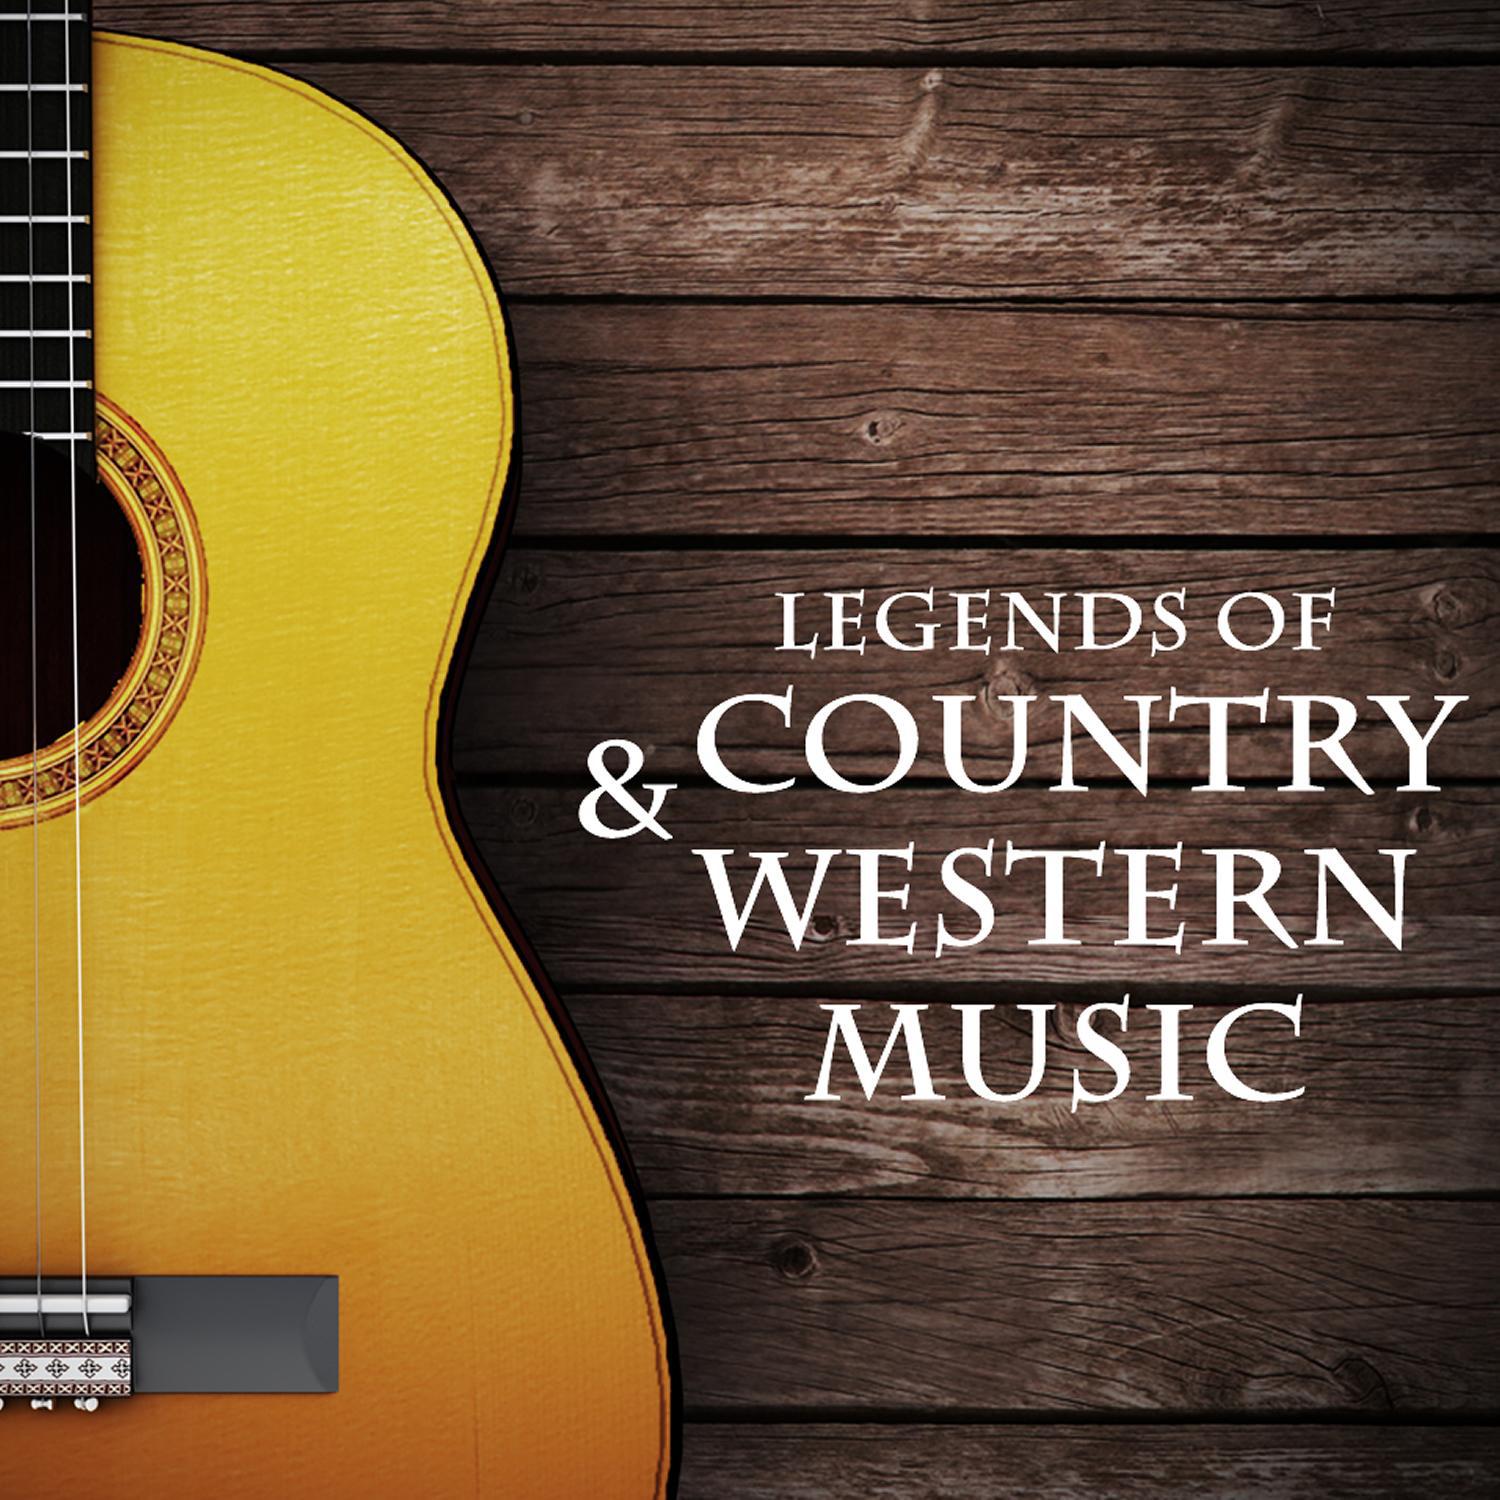 Legends of Country & Western Music: 25 Classic Songs by Johnny Cash, Hank Williams, George Jones, Patsy Cline, Tammy Wynette & More!